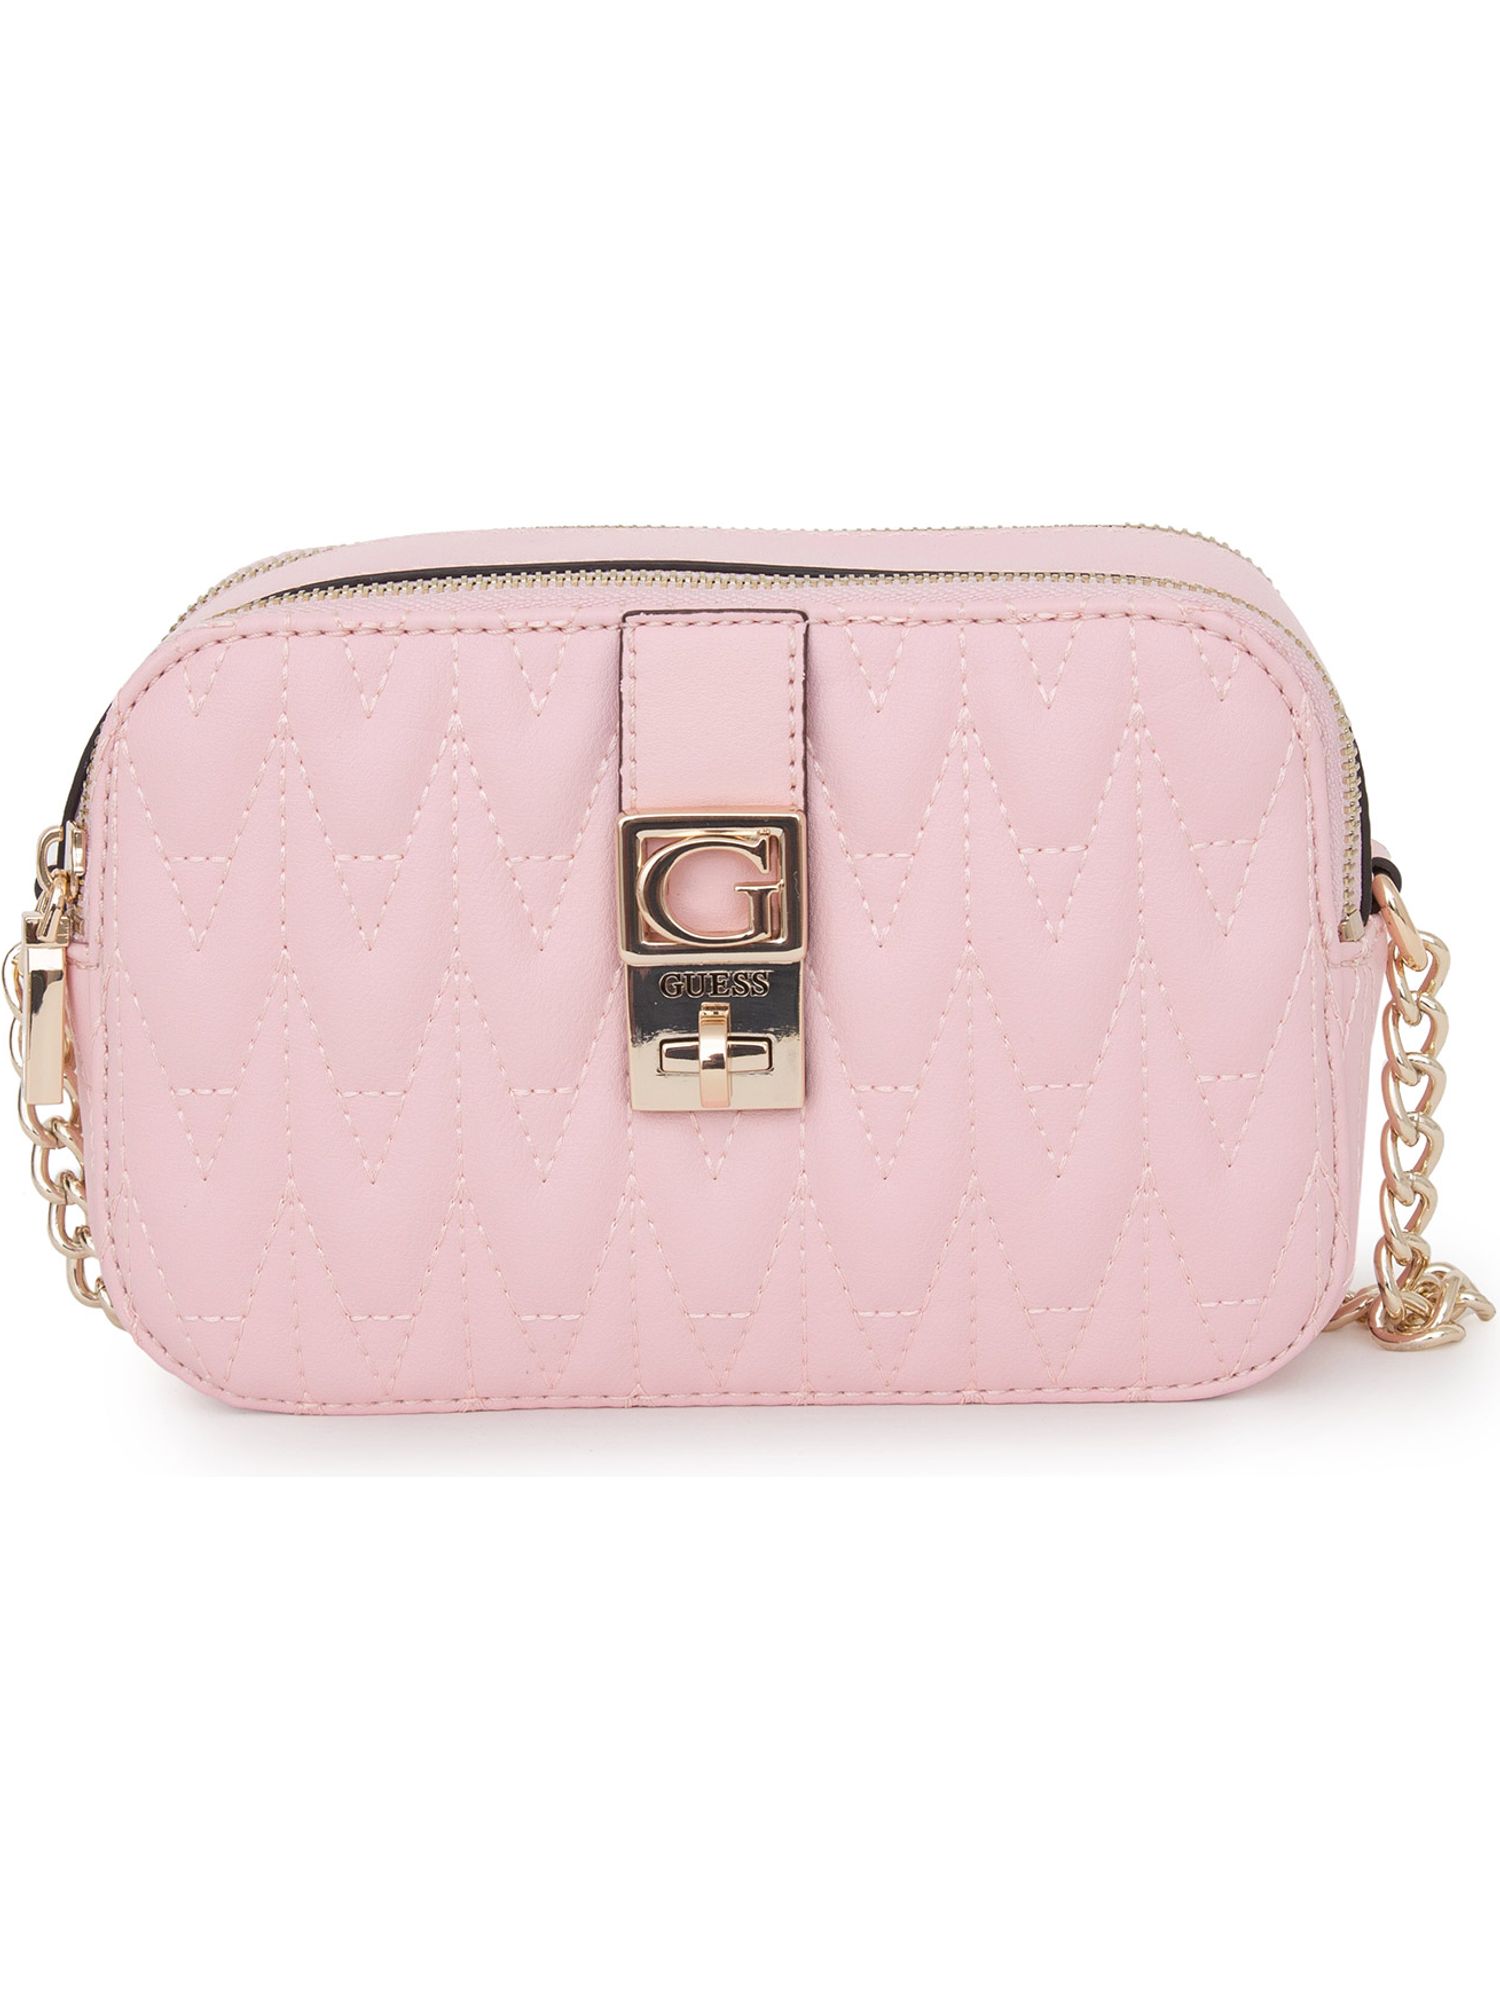 BORSA A SPALLA GUESS JEANS ROSA - Glamour Store